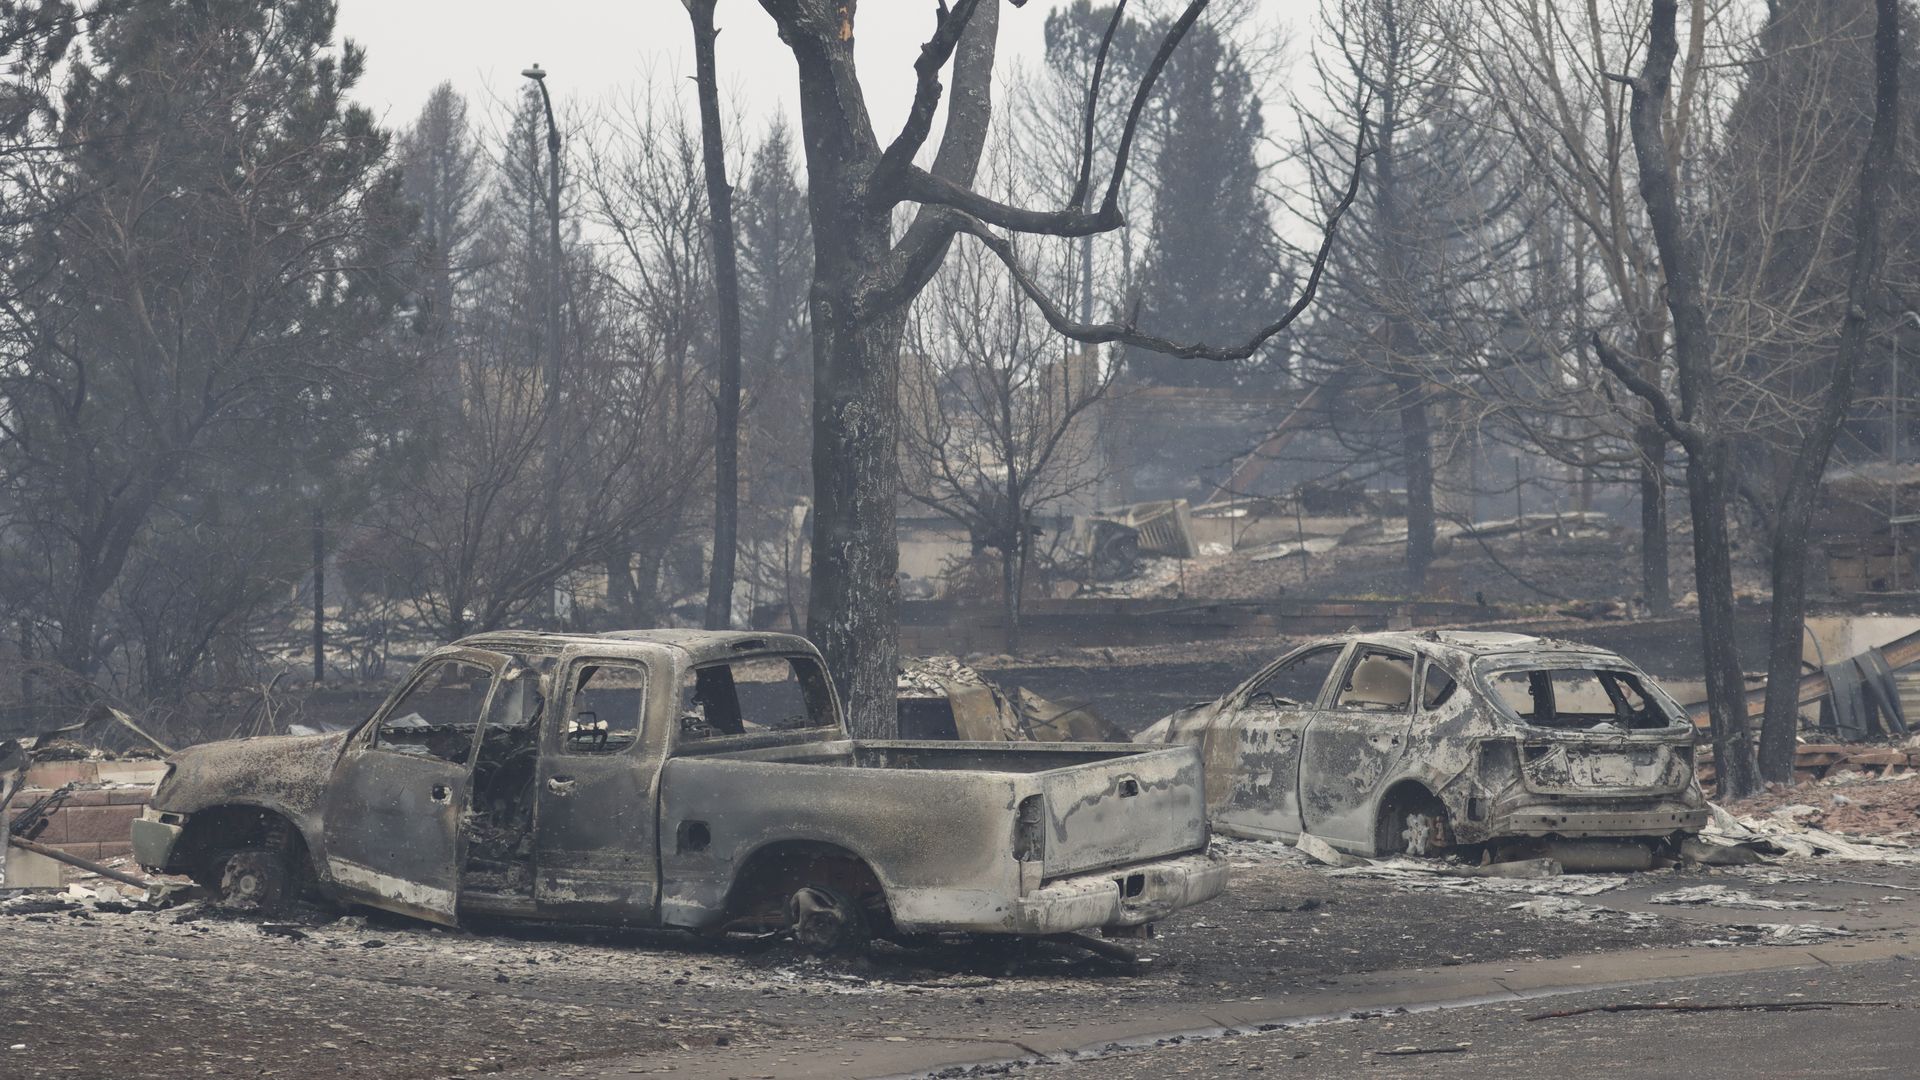 Burnt out vehicles sit amidst the remains of a Louisville neighborhood in the aftermath of the Marshall Fire. Photo: Marc Piscotty/Getty Images